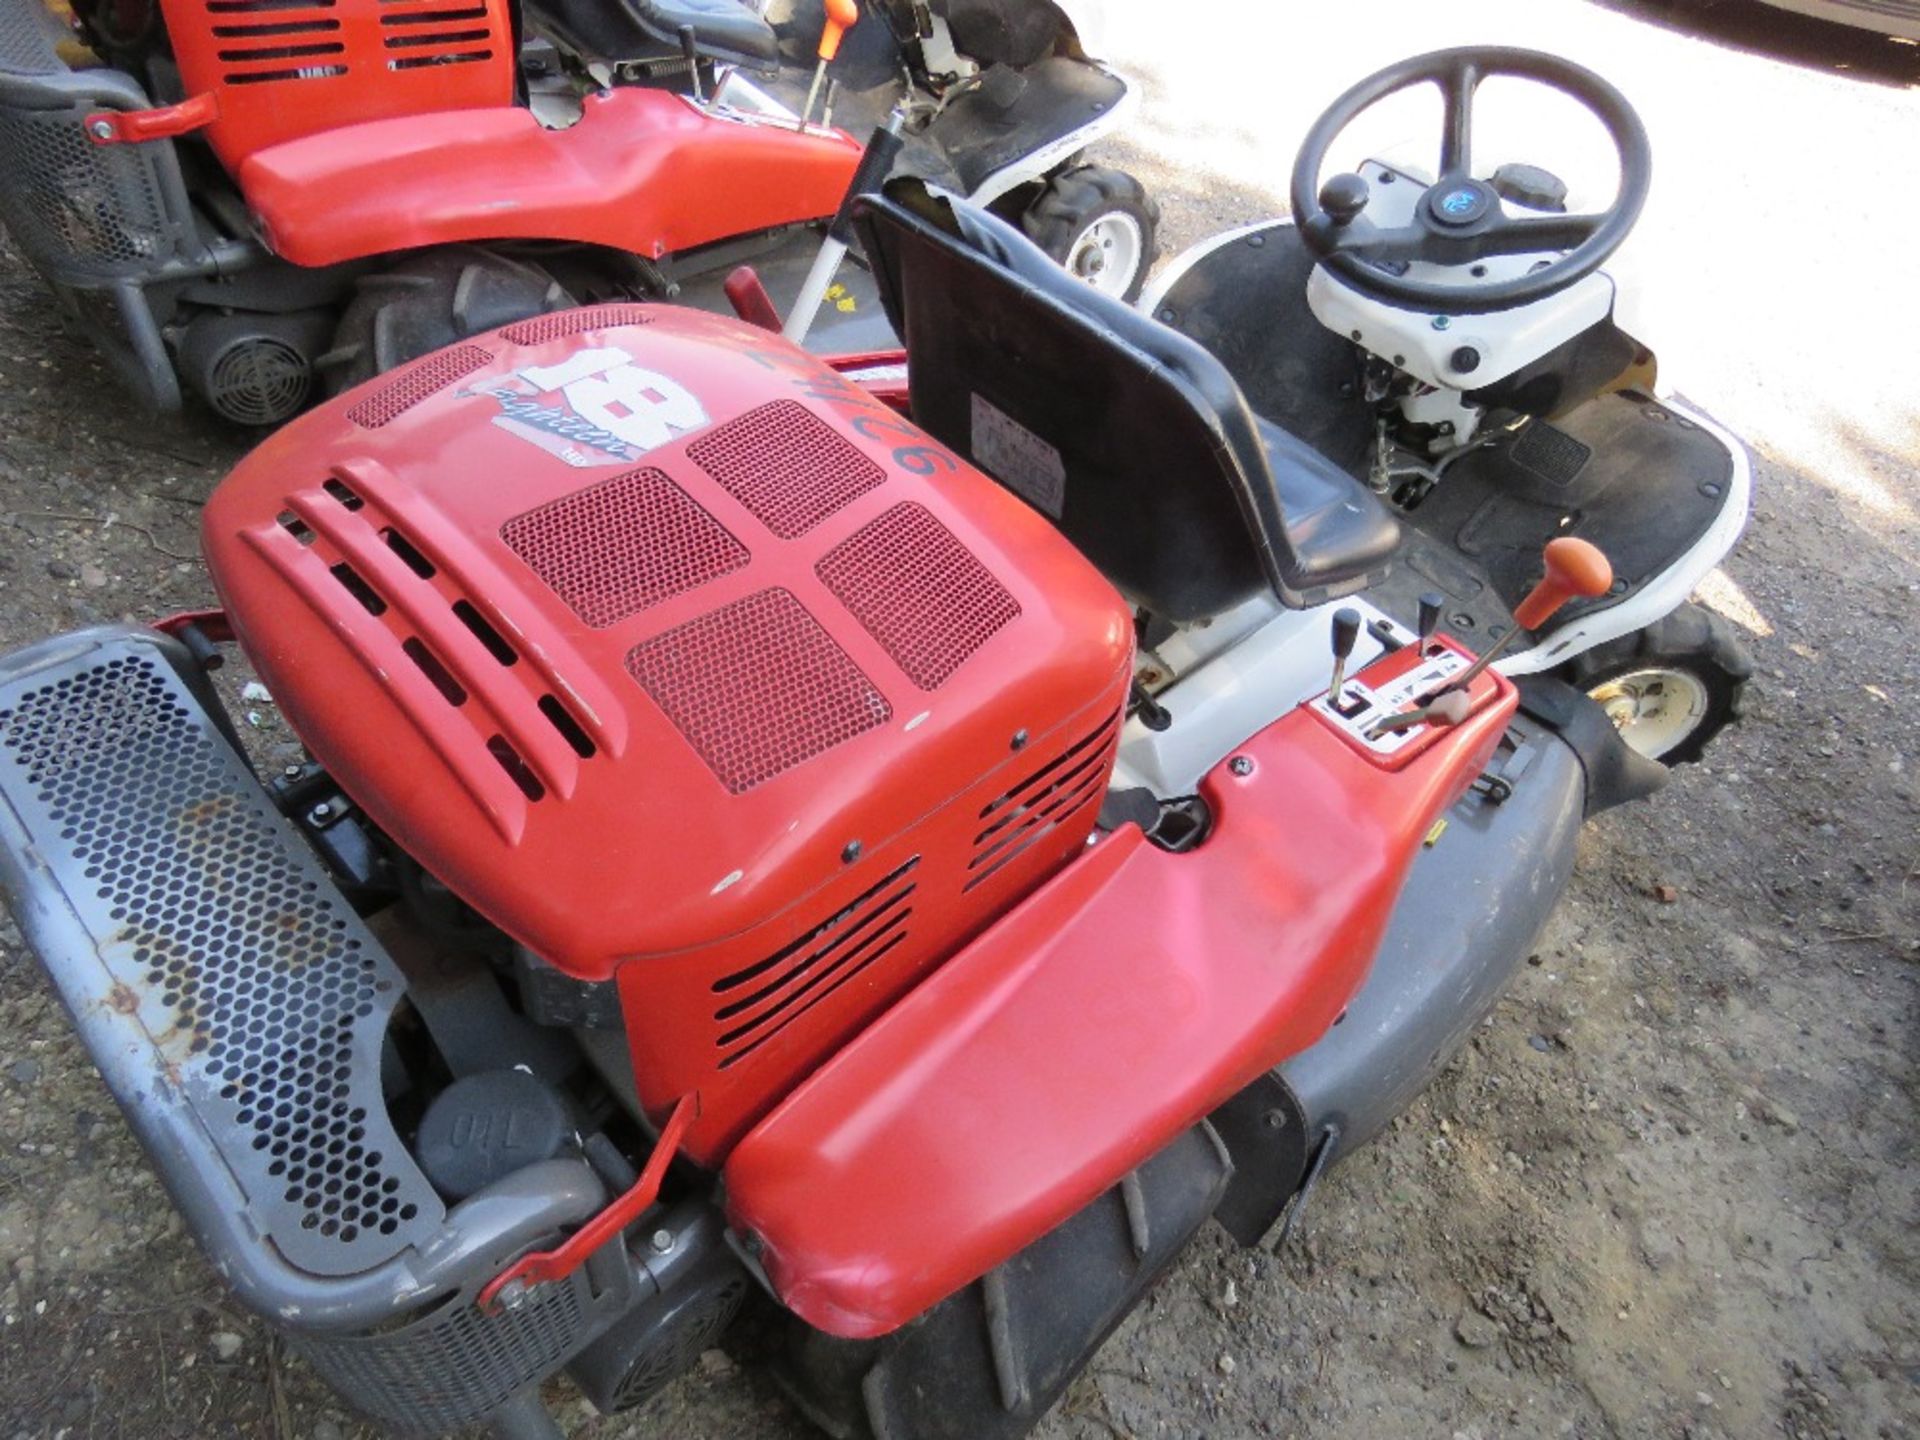 OREC RM97B PROFESSIONAL ROUGH CUT RIDE ON MOWER, YEAR 2015 BUILD, 391 REC HOURS. PN:92/47. SN:JD15A0 - Image 6 of 6